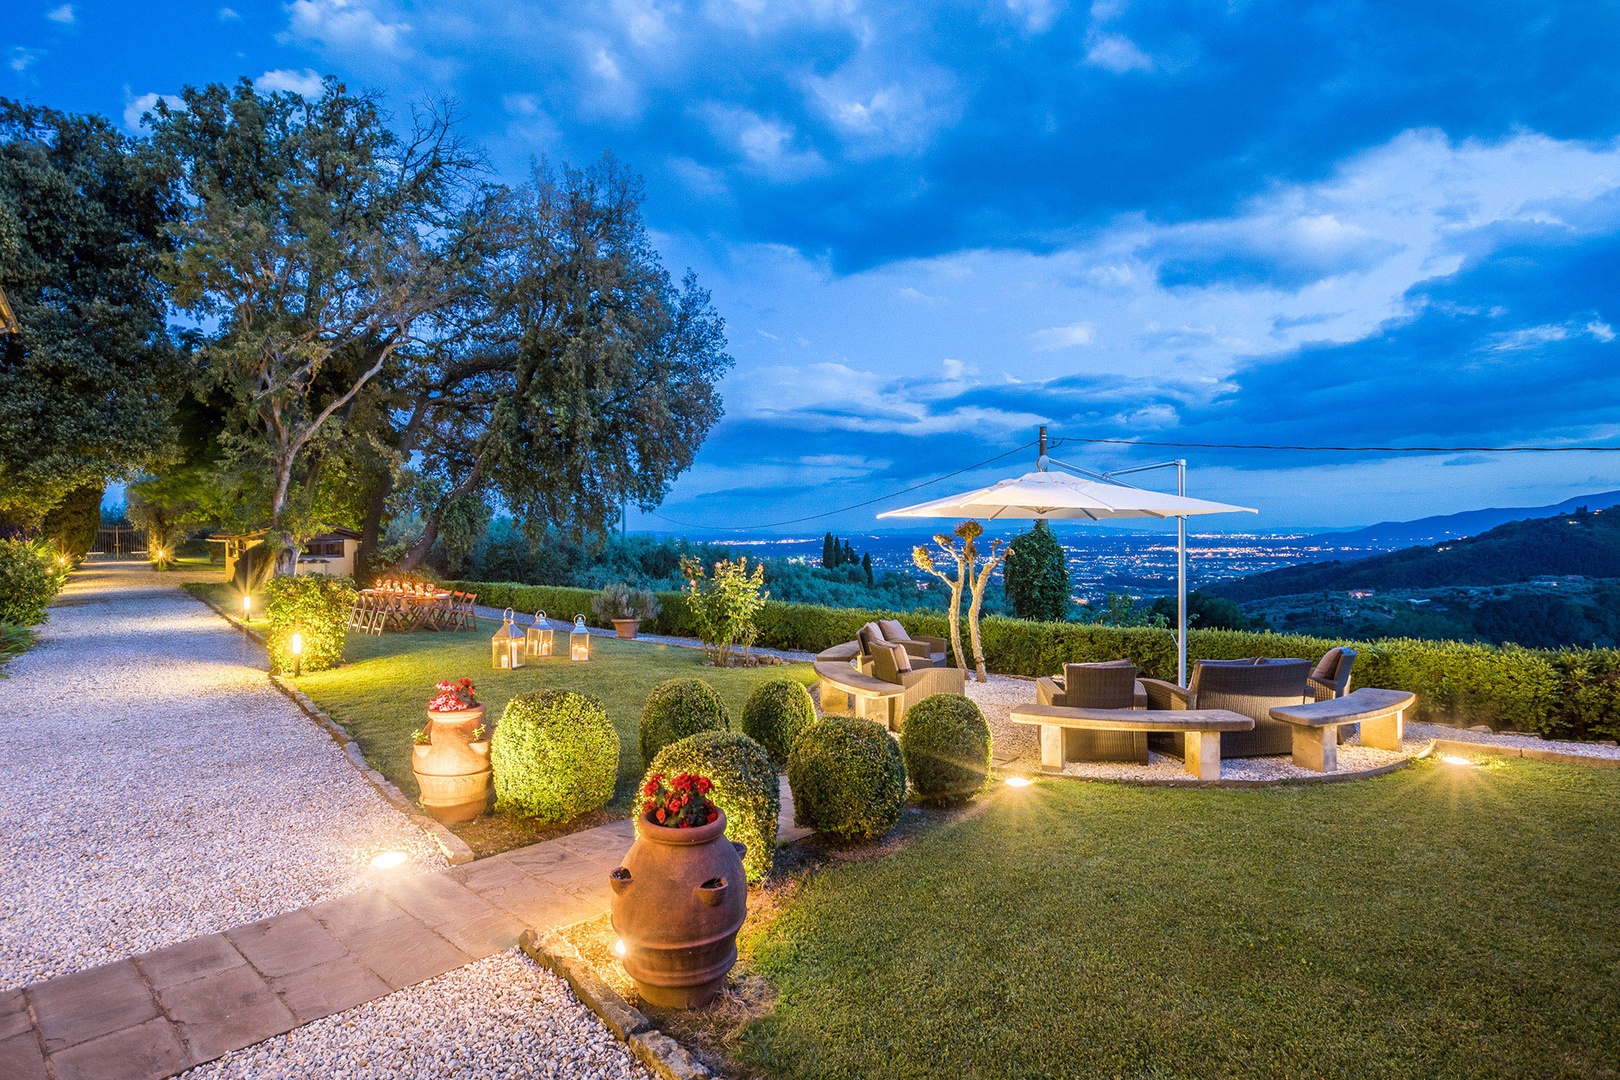 The panoramas from the villa are of the Valdinievole, the valley of the Nievole river.